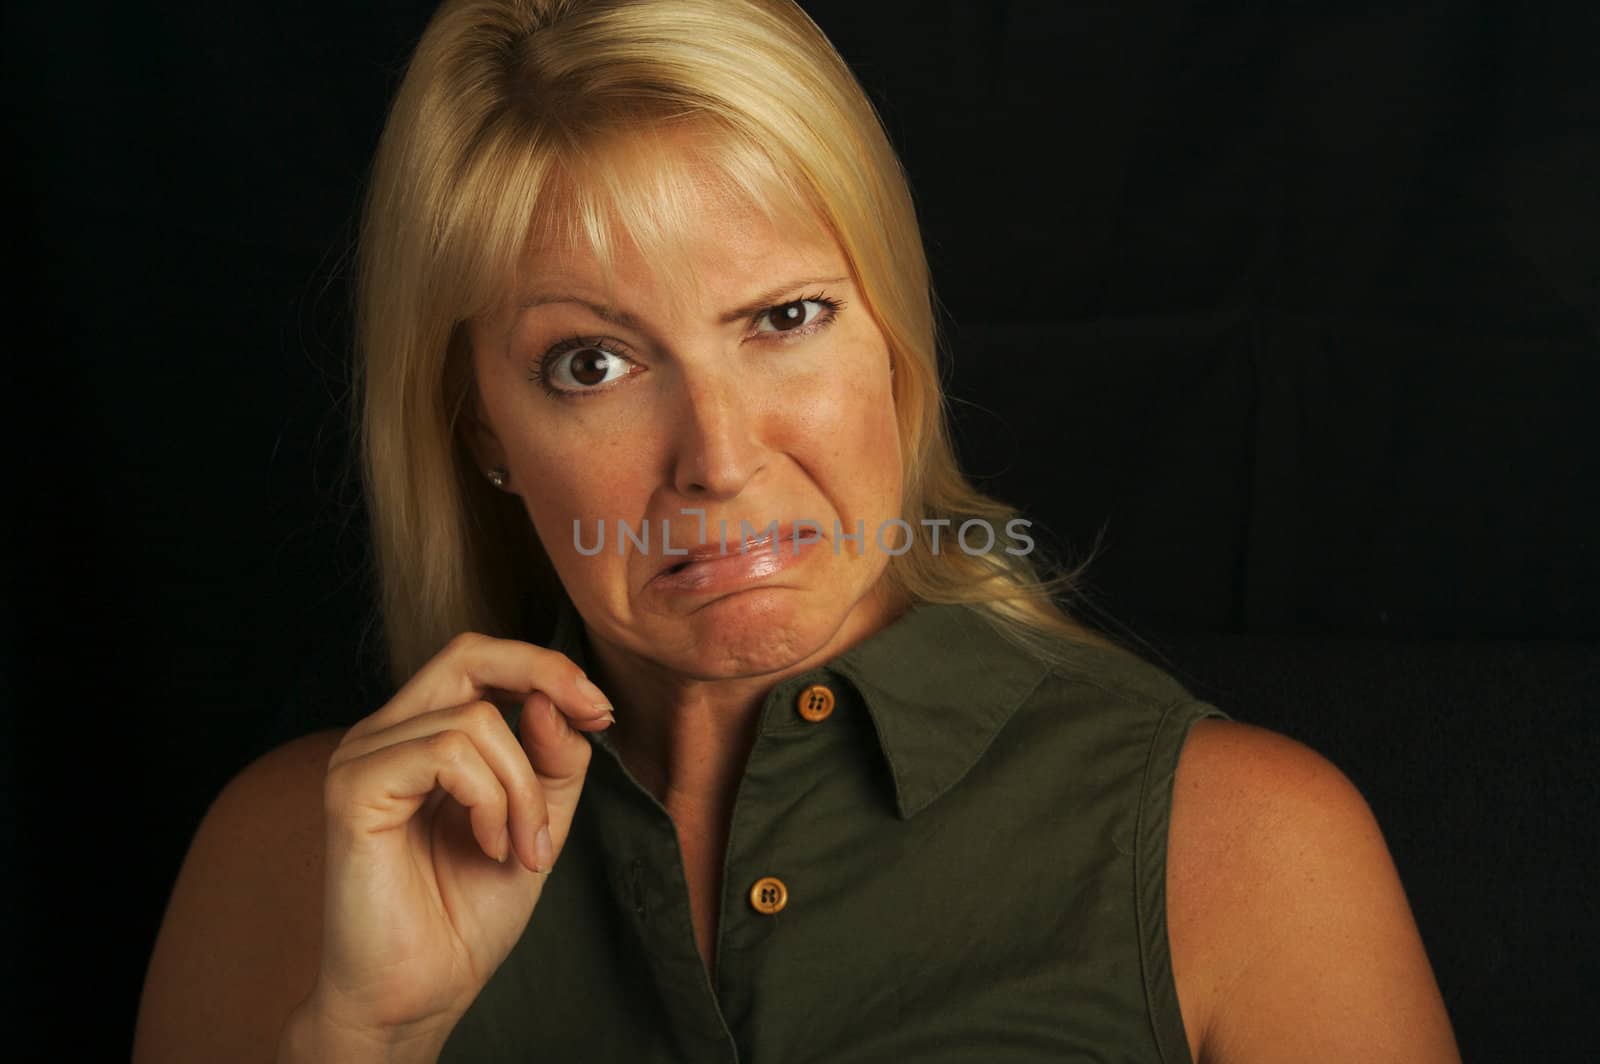 Attractive Blond Haired, Brown Eyed Woman Grimaces on a black background.